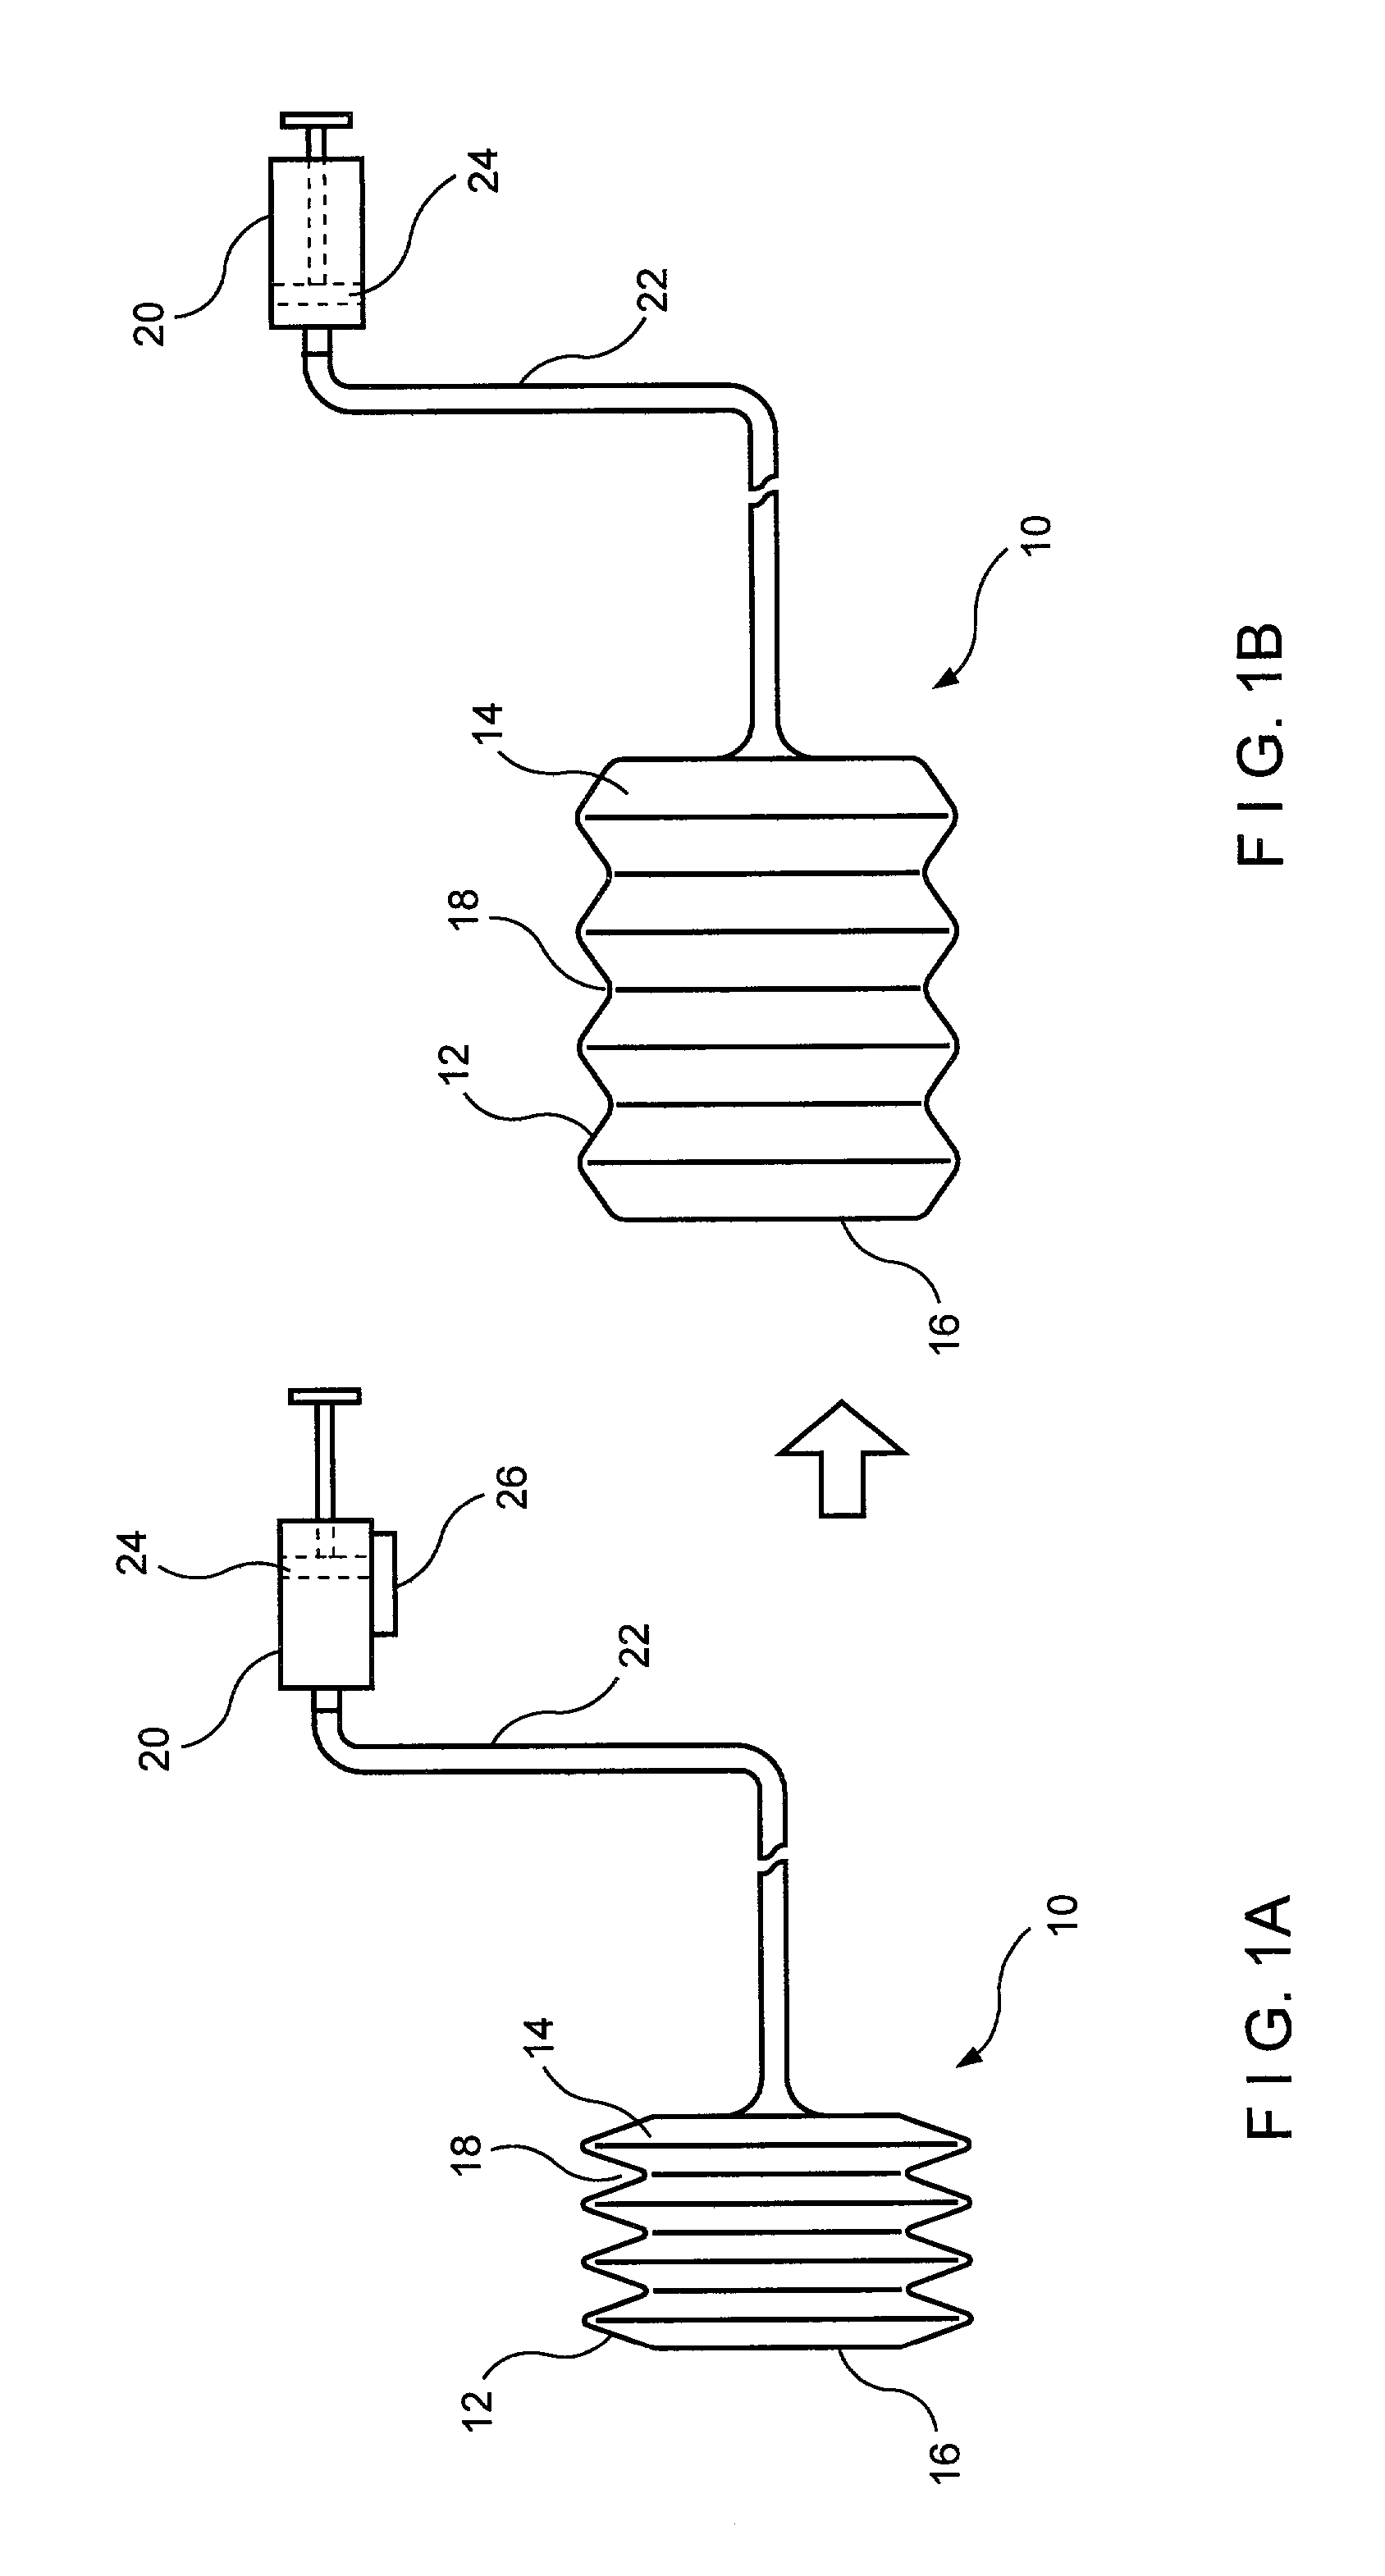 Balloon-type actuator for surgical applications